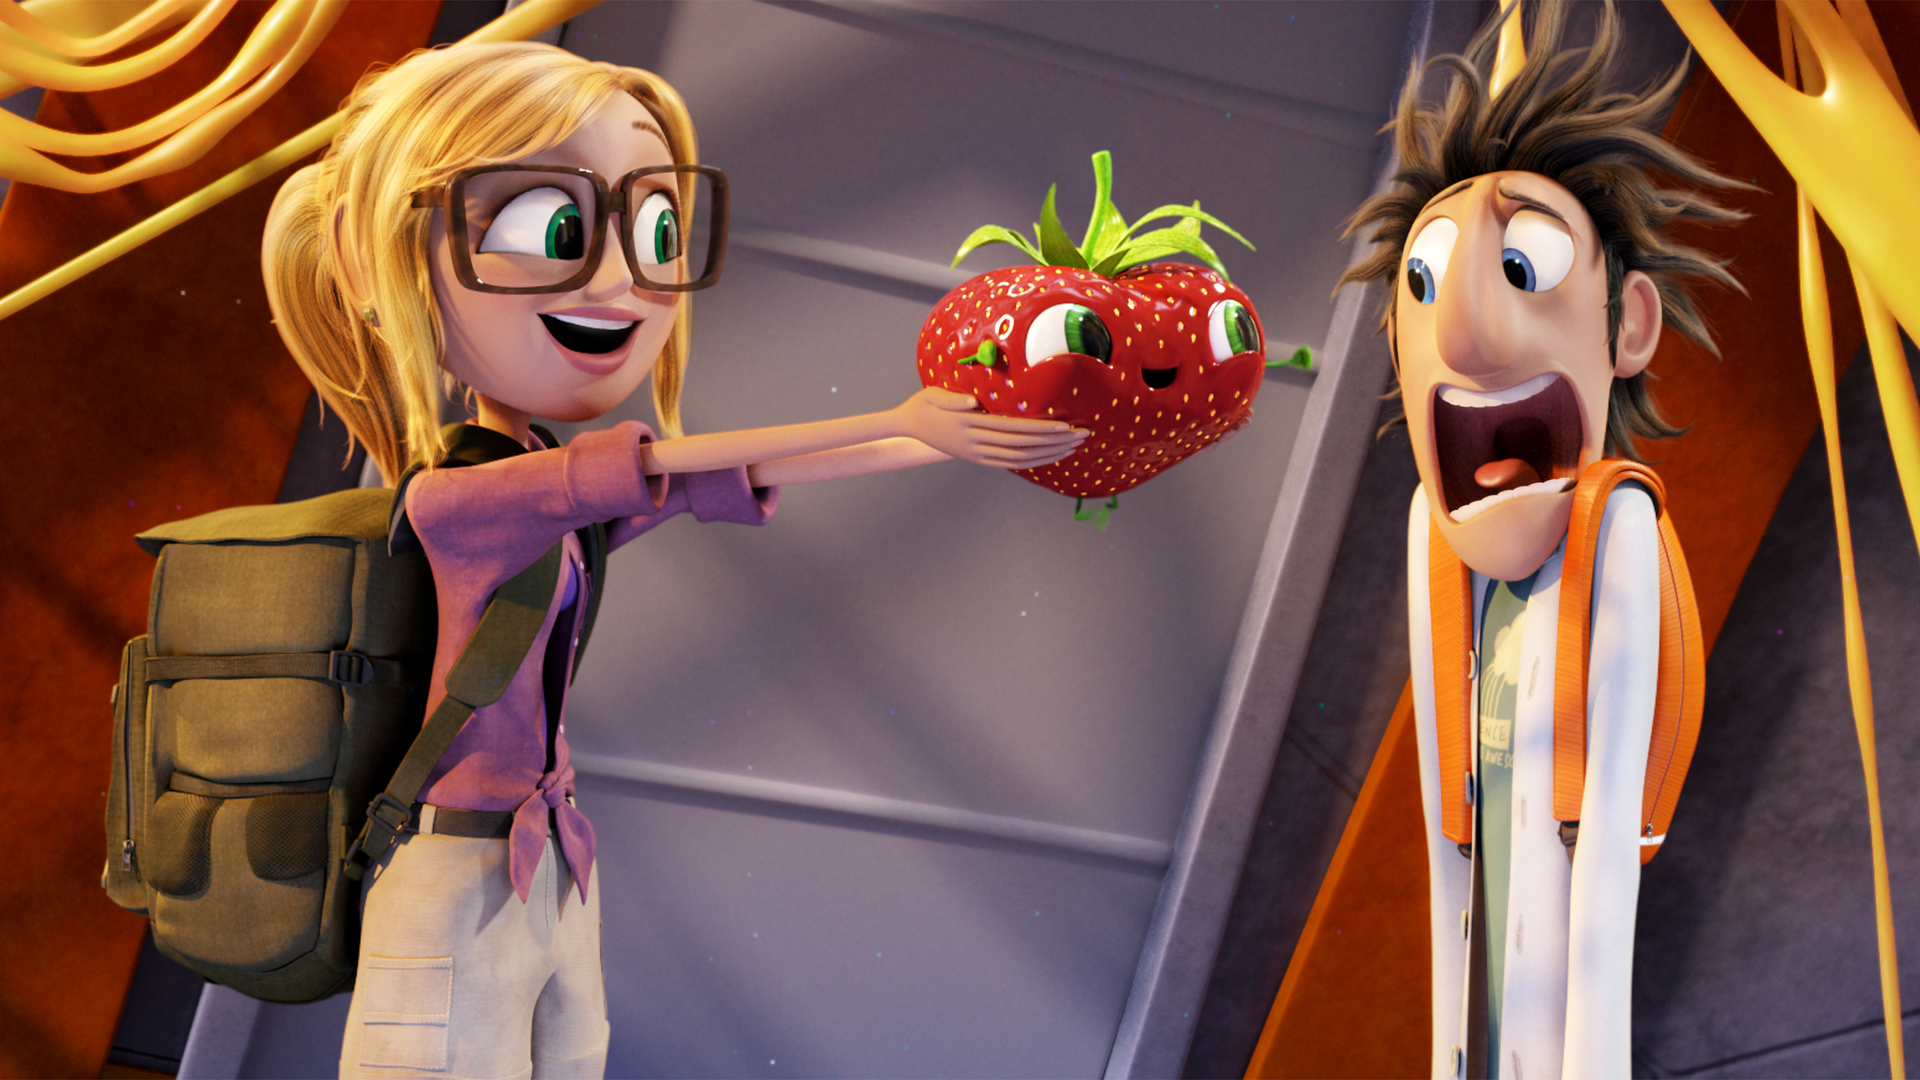 Movie Cloudy with a Chance of Meatballs 2 HD Wallpaper | Background Image